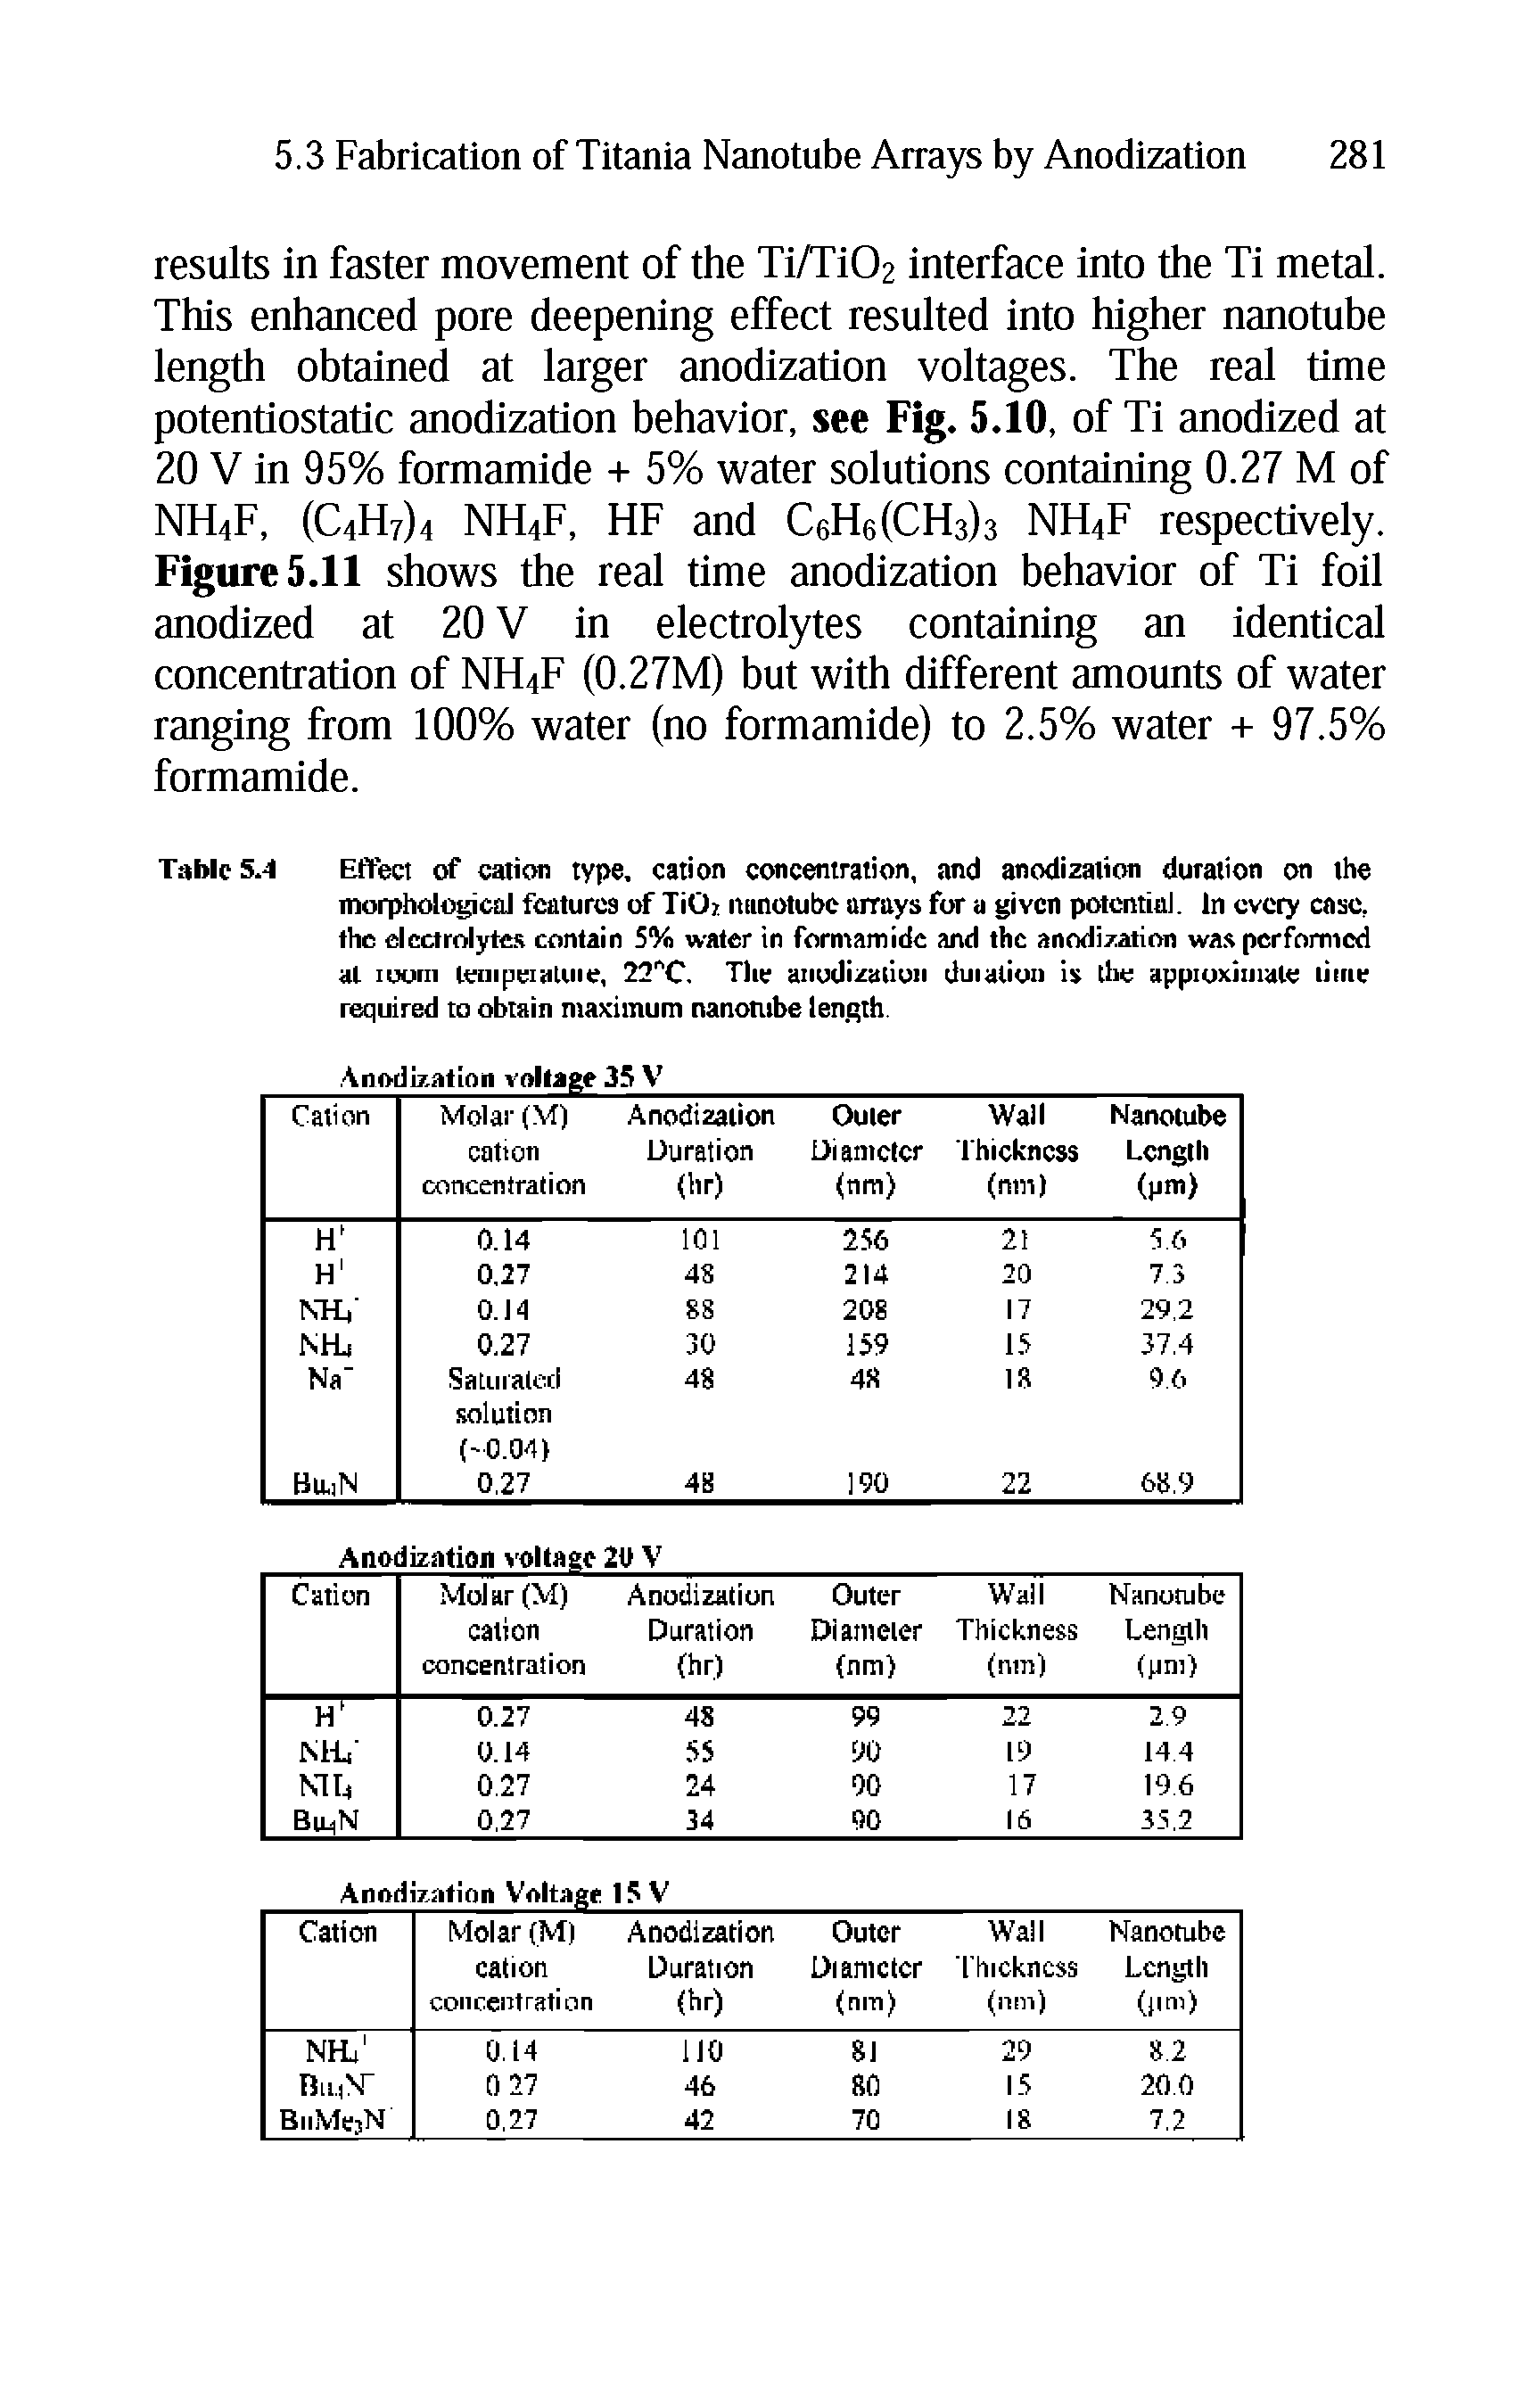 Table 5.4 EU eci of cation type, cation concentration, and anodization duration on the morphologicoJ features of TiOi niinotubc arrays fur a given potential. In every case, the electrolytes contain 5% water in formamide and the anodization was performed at luom teiiipeialuie, 22"C. The aiiudizaliuii duialiuii is the appioxiiiiale time required to obtain maximum nanonibe length...